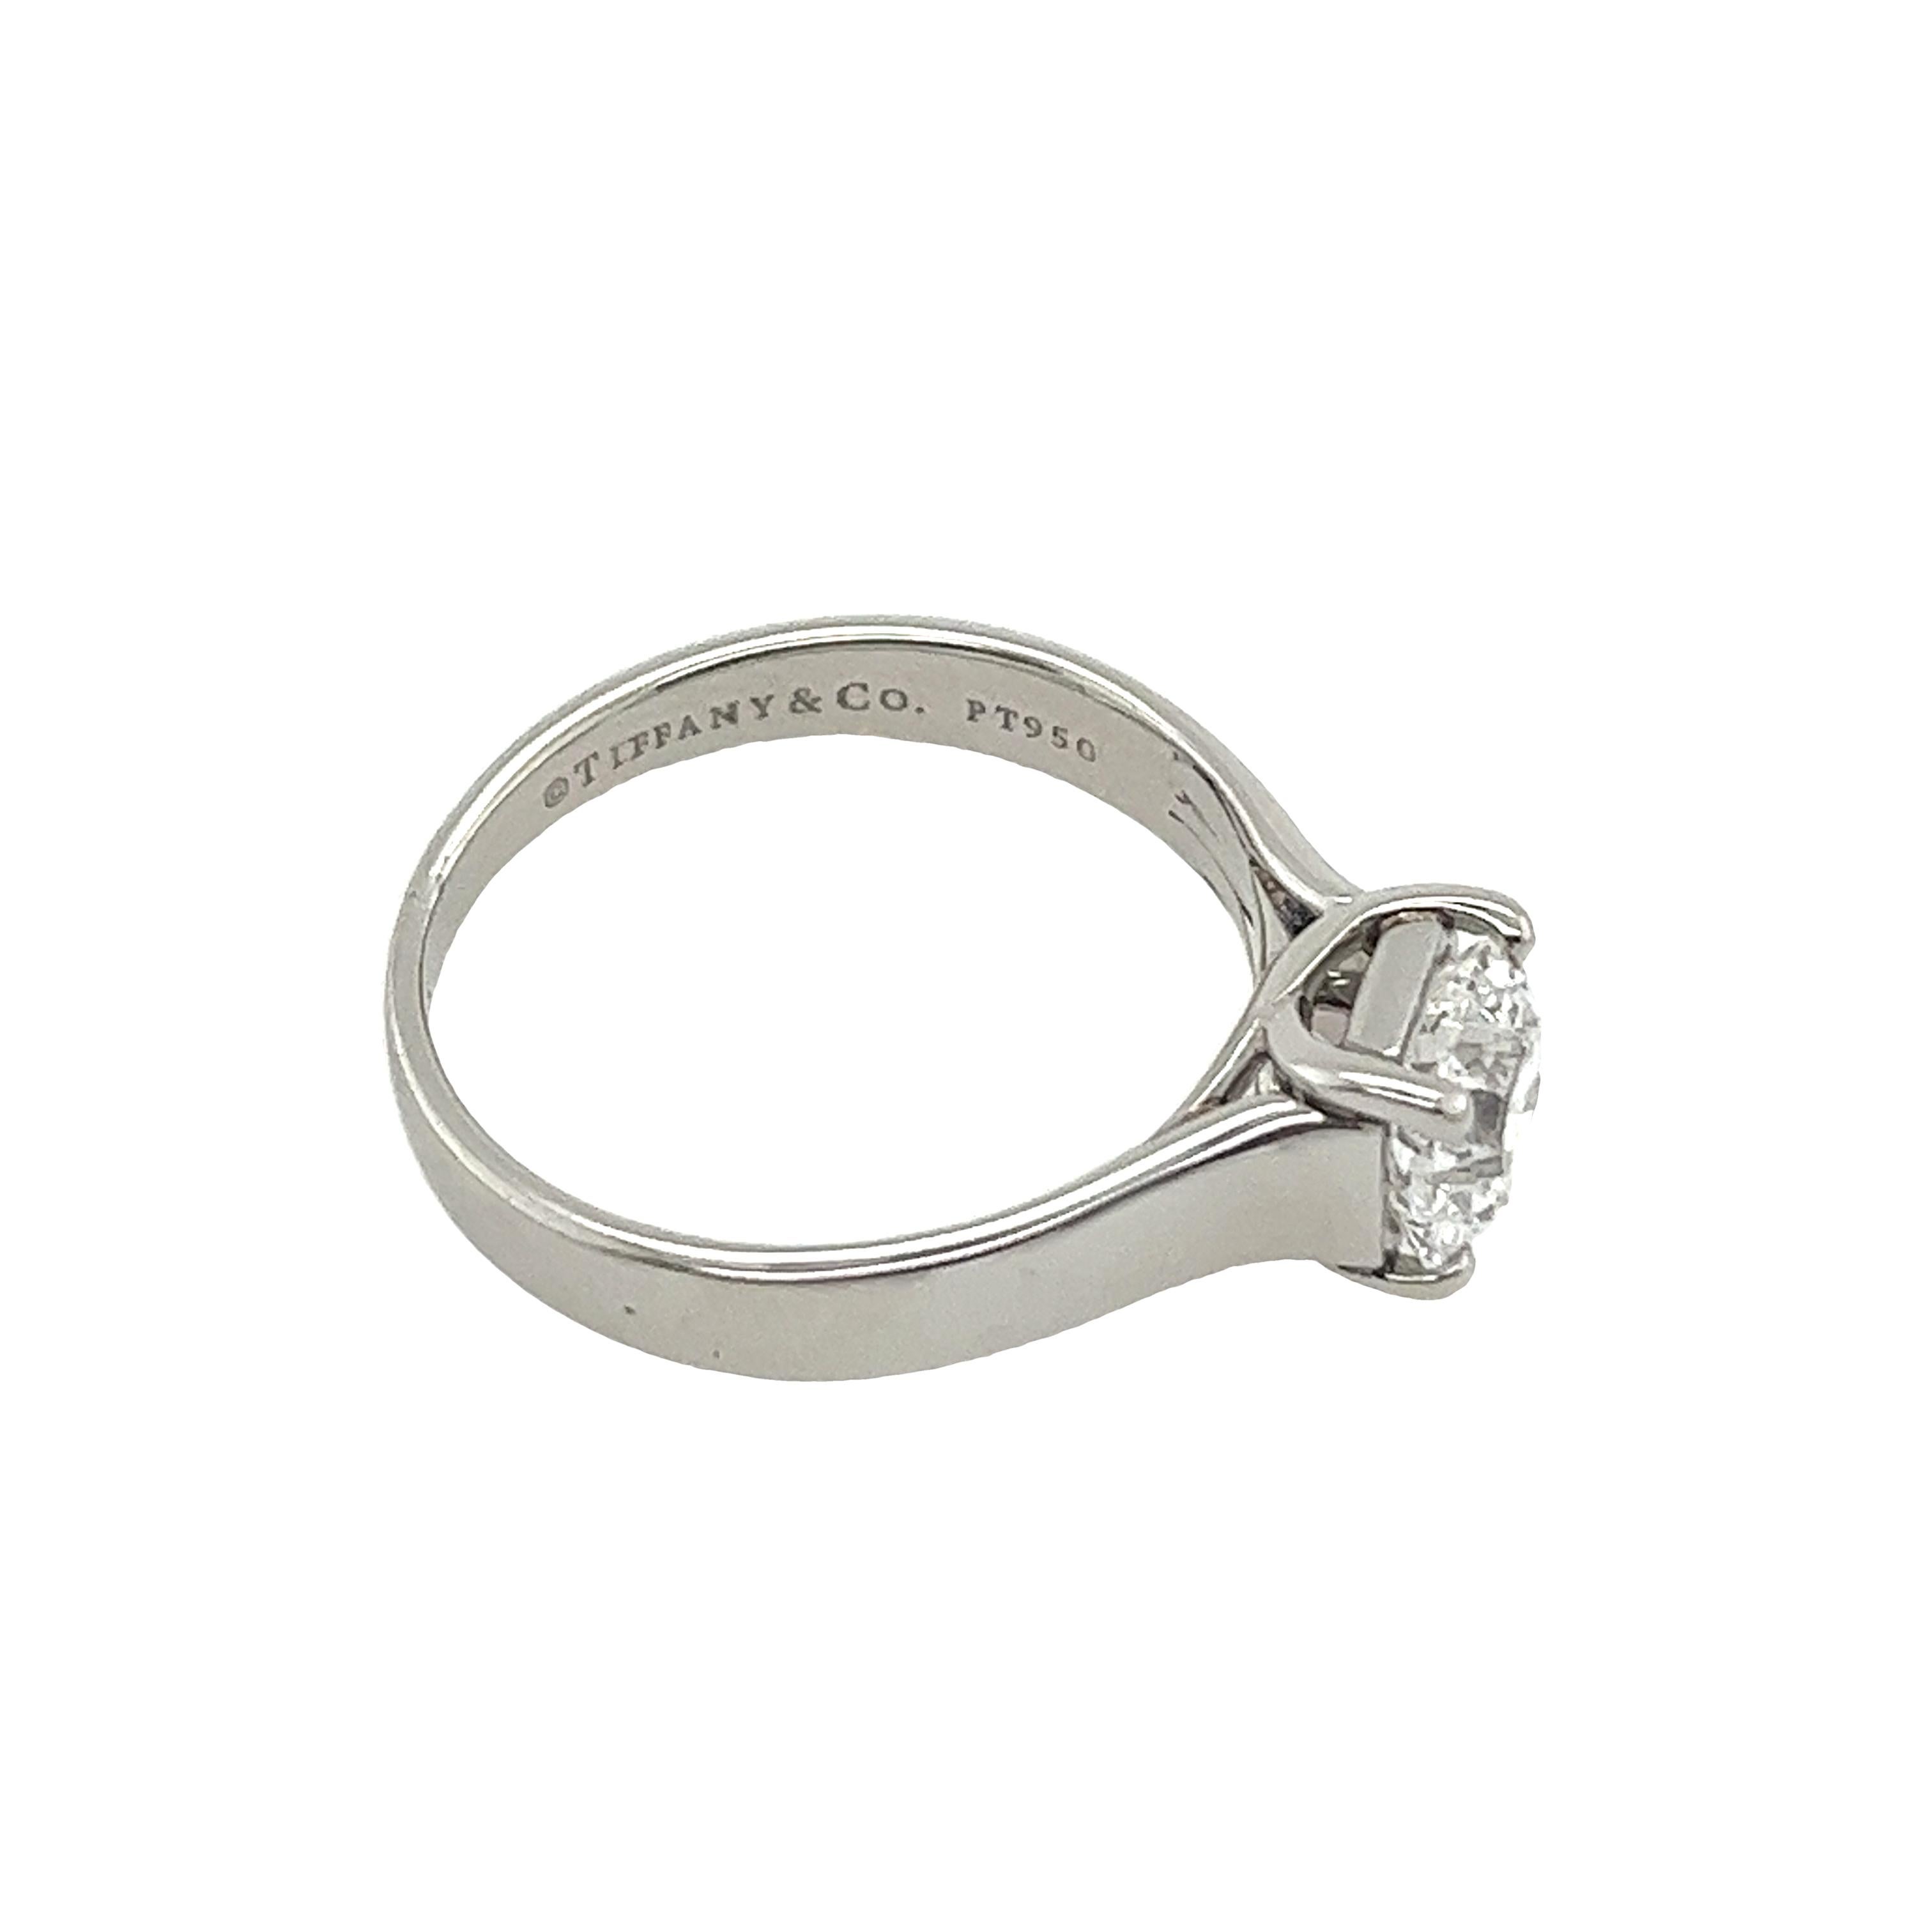 Radiating timeless sophistication, the Tiffany & Co. Diamond and Platinum Classic Solitaire Engagement Ring features a magnificent 1.14ct E/VS1 cut cornered square diamond. Set in platinum, its classic design exudes elegance, symbolizing eternal